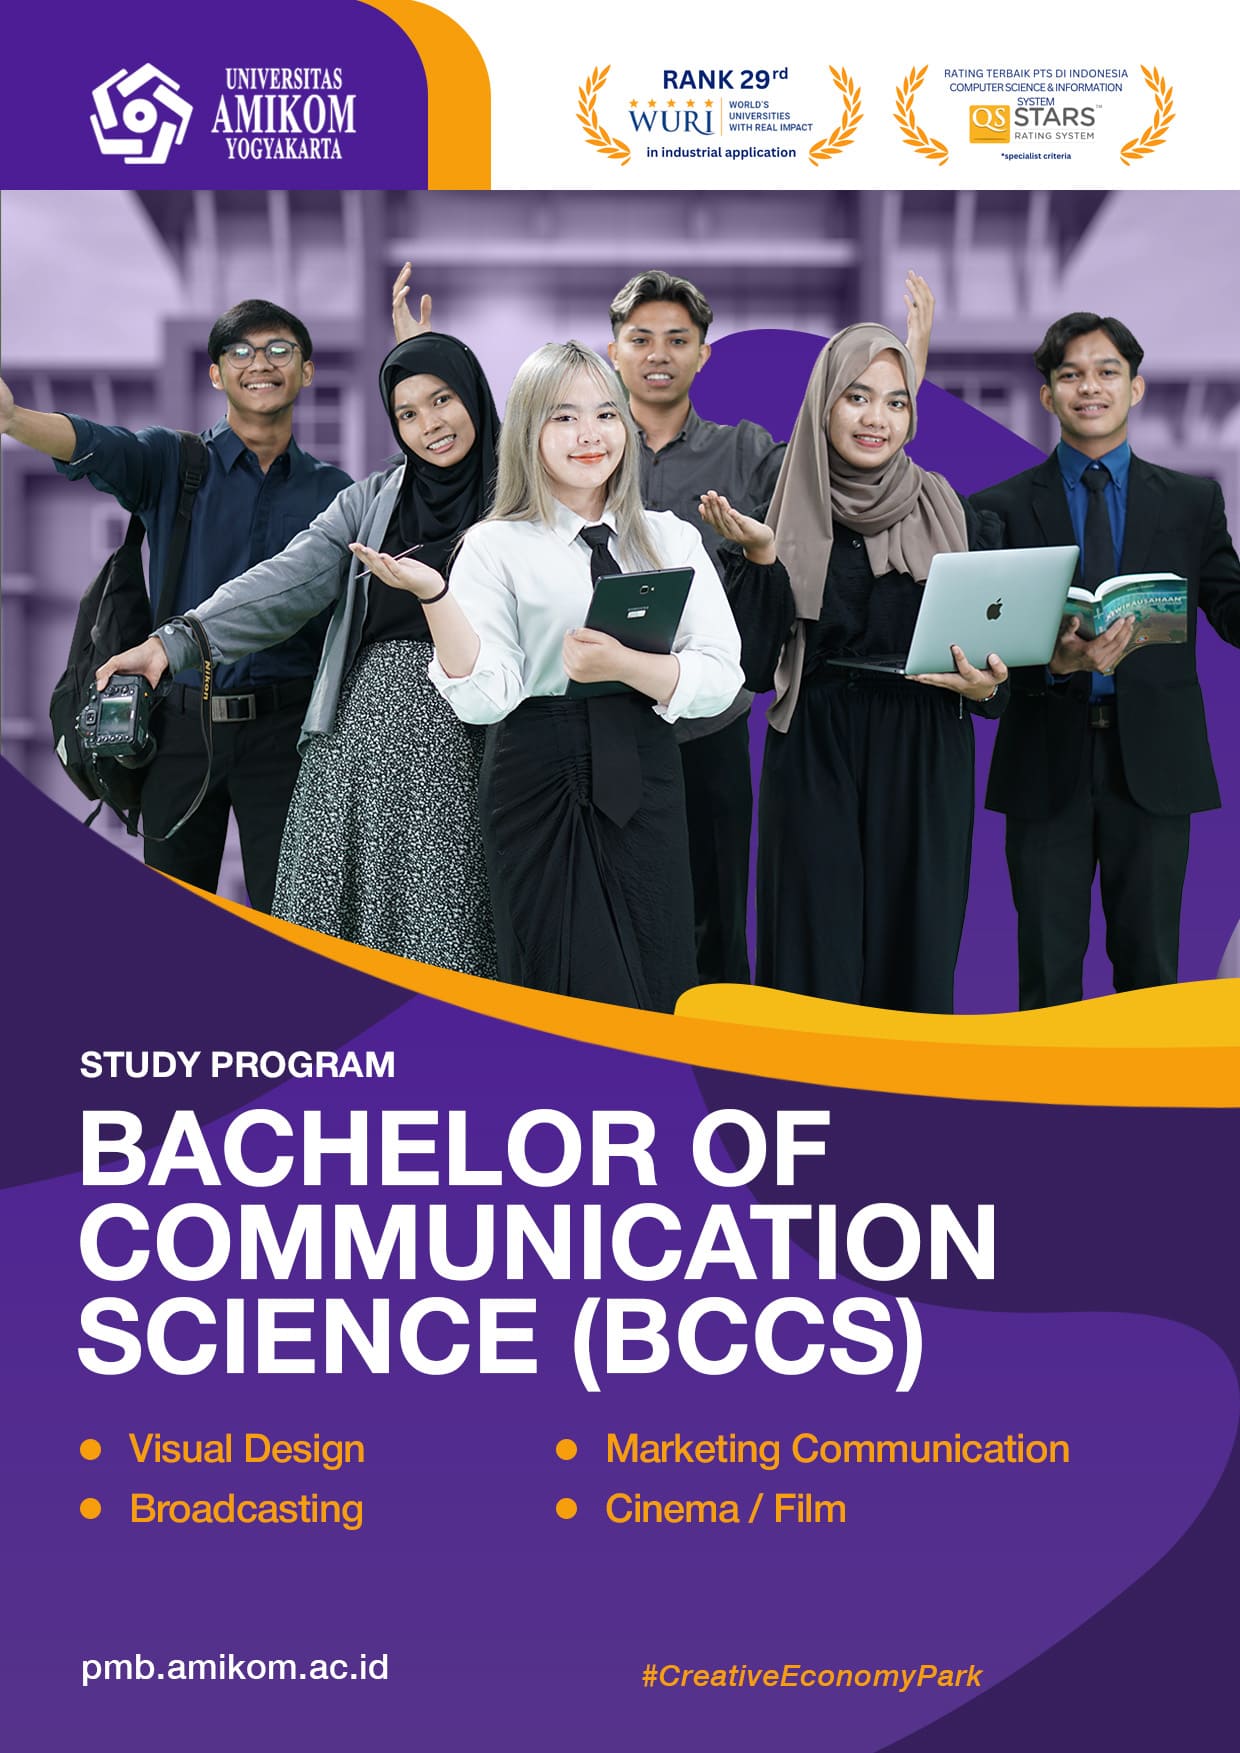 Bachelor of Communication Science